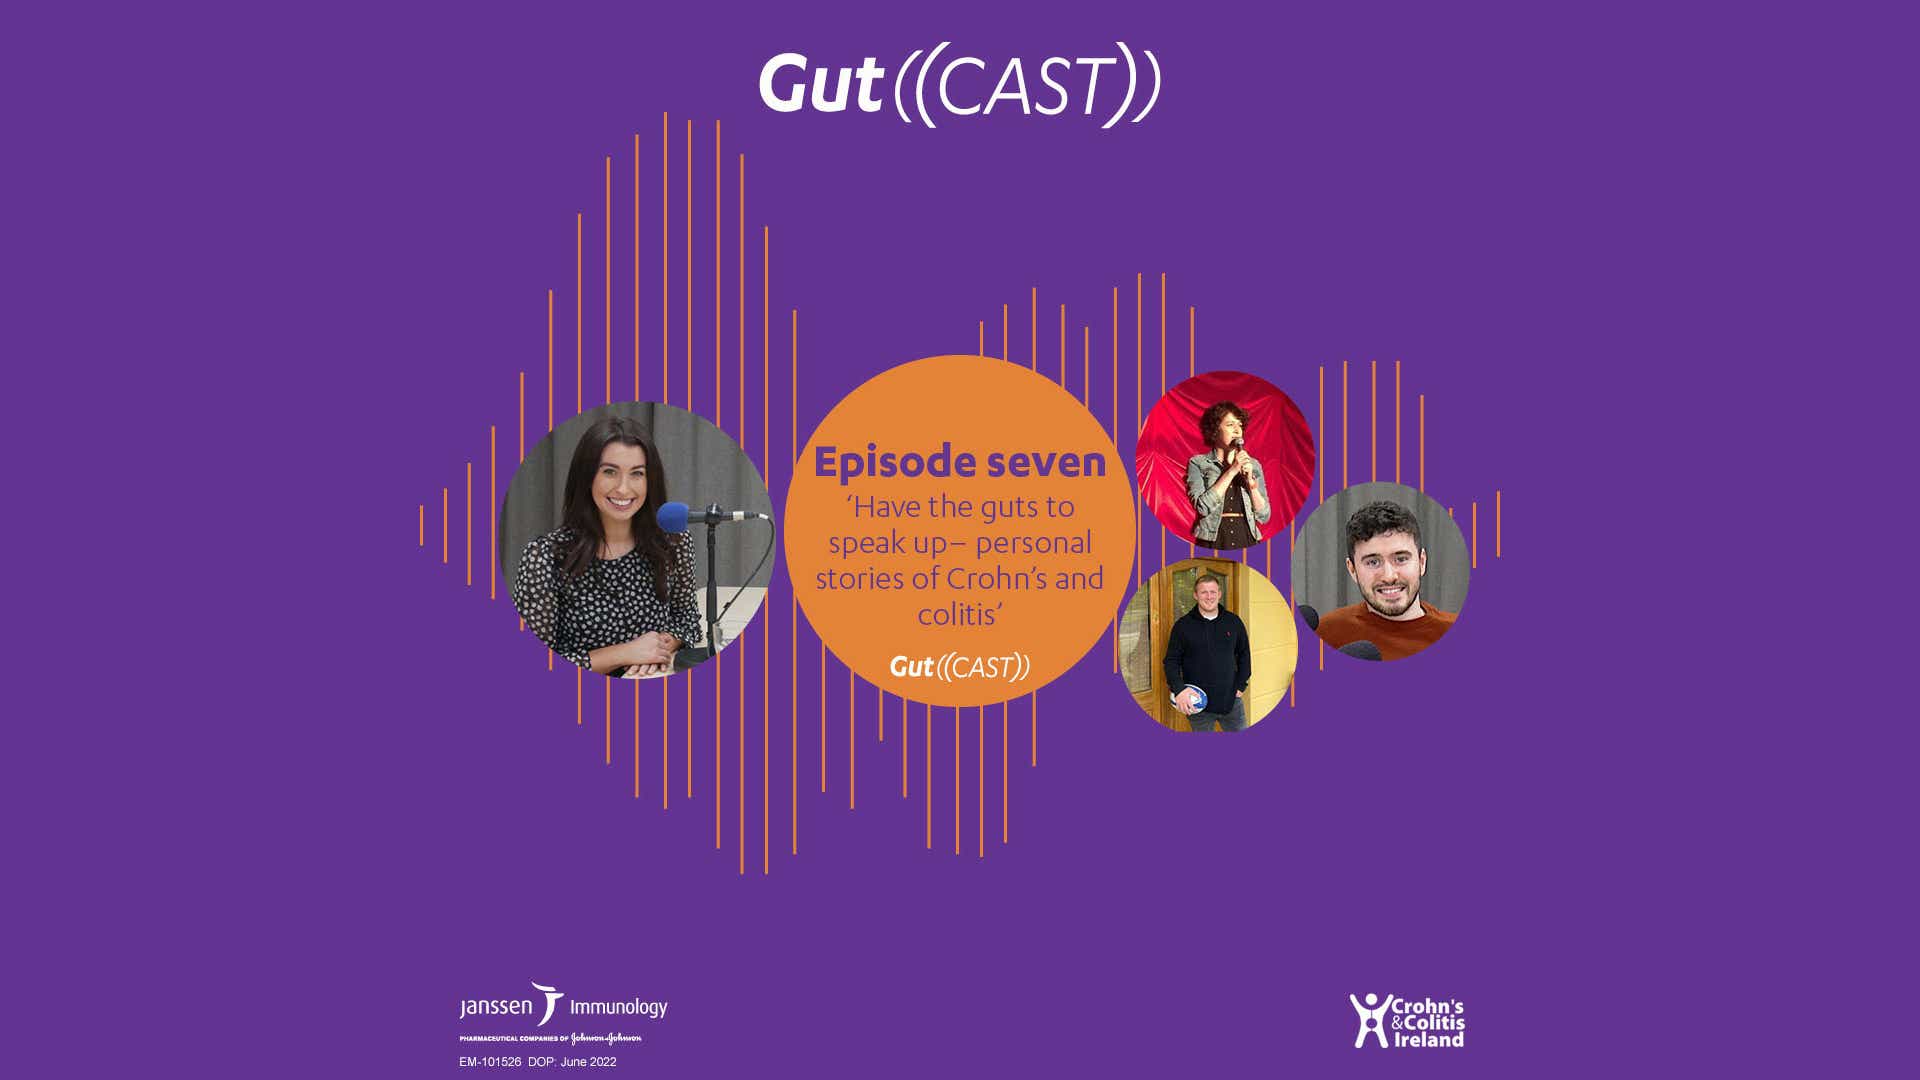 Season one episode seven of the podcast series Gutcast named "Have the guts to speak up-personal - stories of Crohn's and colitis"